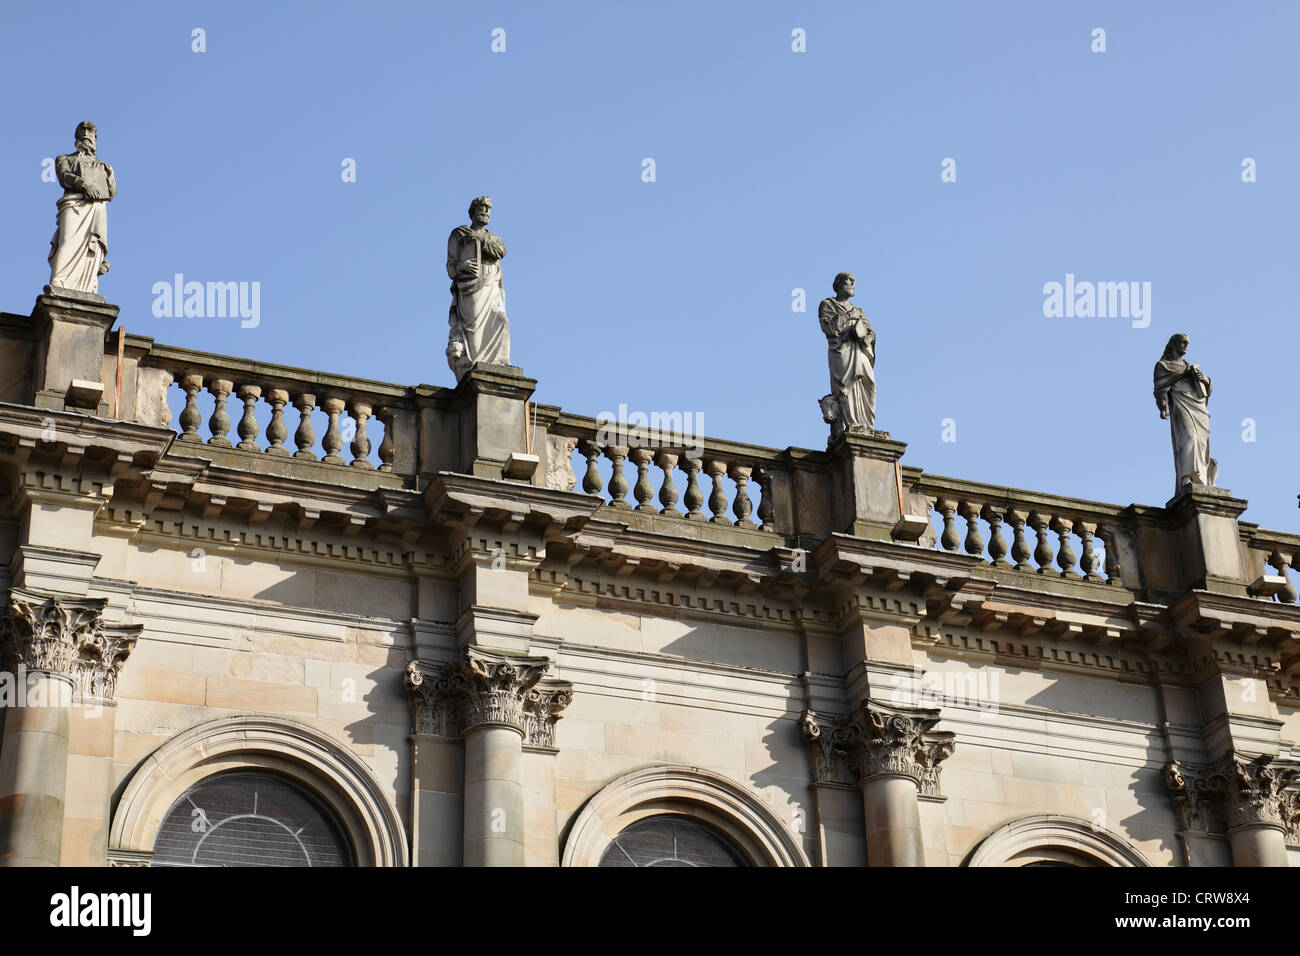 Glasgow Evangelical Church detail showing 4 Evangelists statues, designed by architect John Honeyman, built 1878-1880, Cathedral Square, Scotland, UK Stock Photo